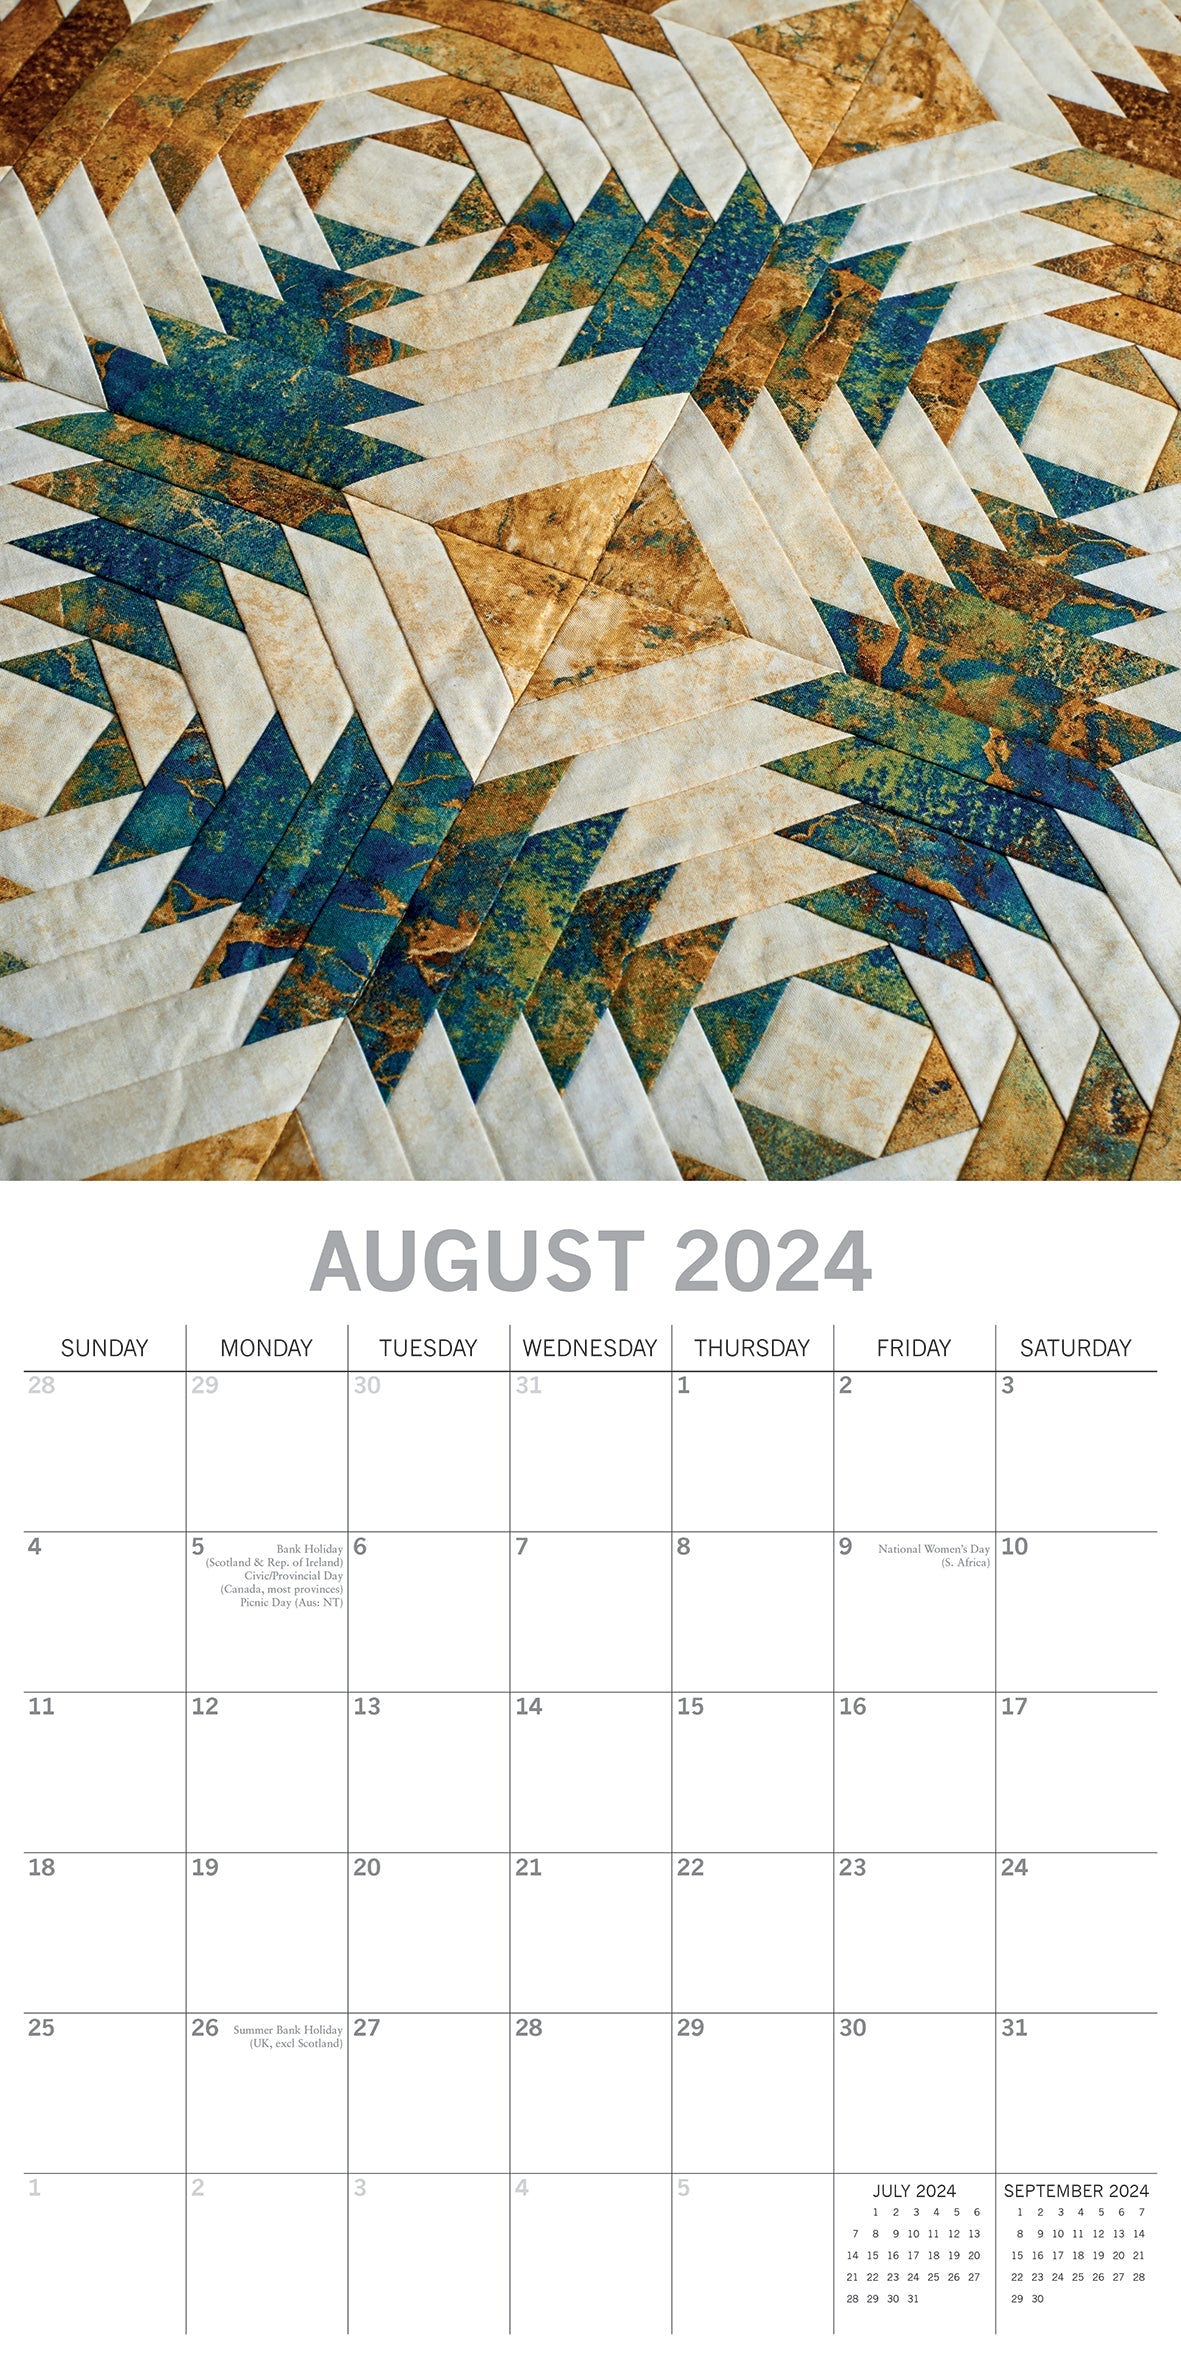 2024 Quilting - Square Wall Calendar